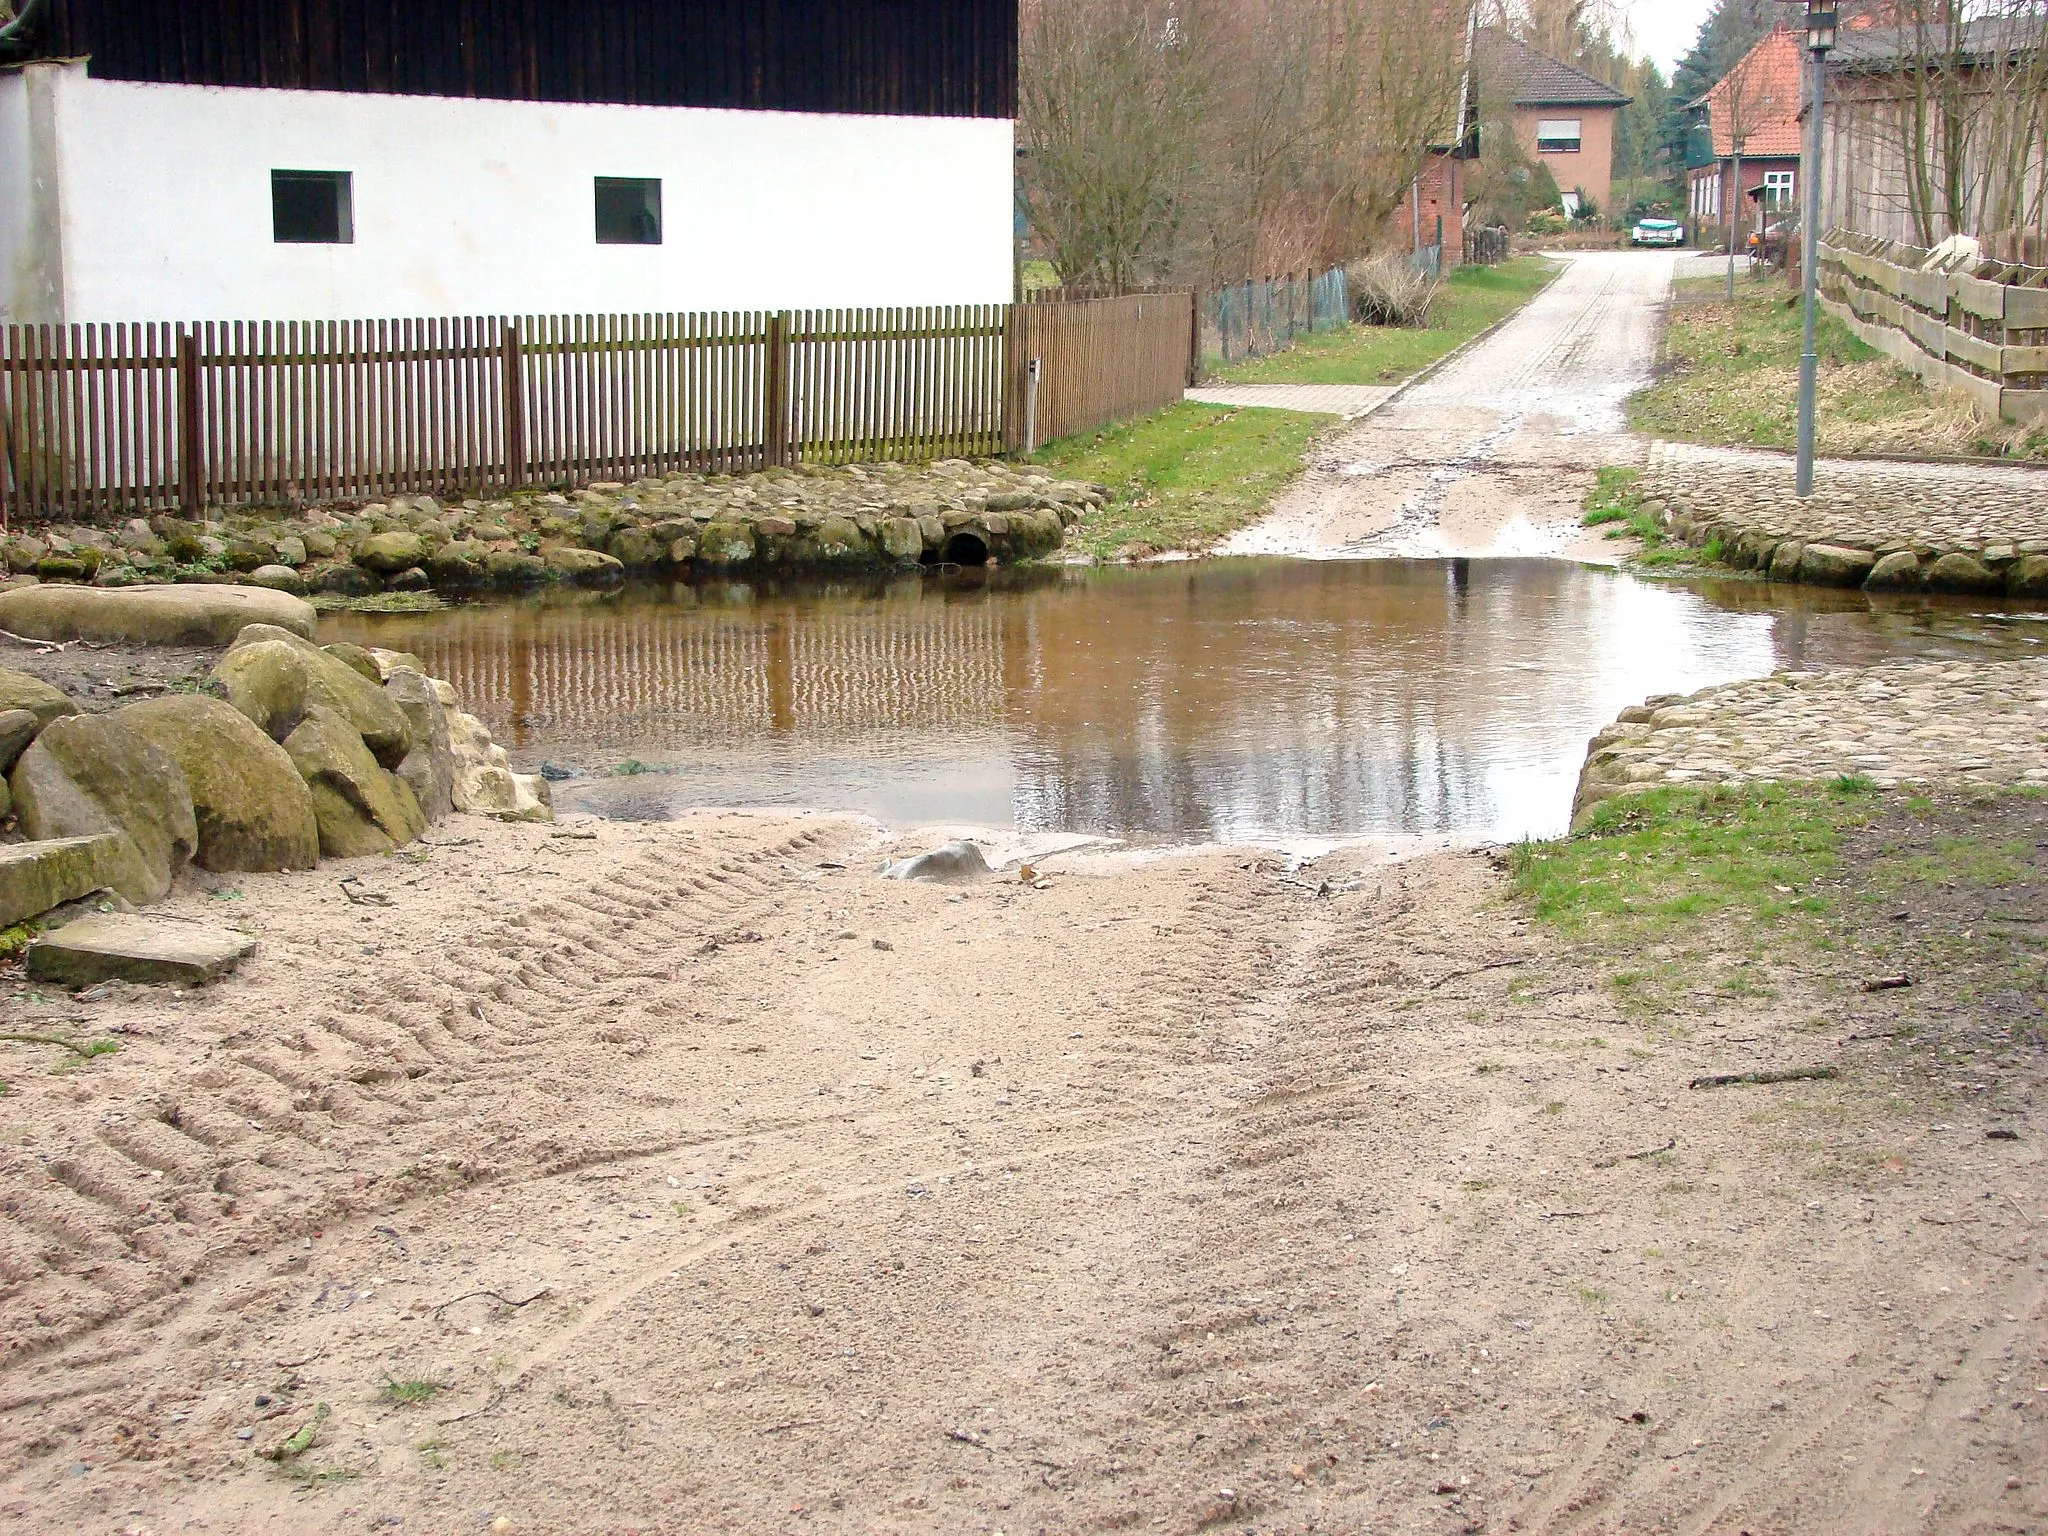 Photo showing: Ford across the River Lachte at Steinhorst, Lower Saxony, Germany.